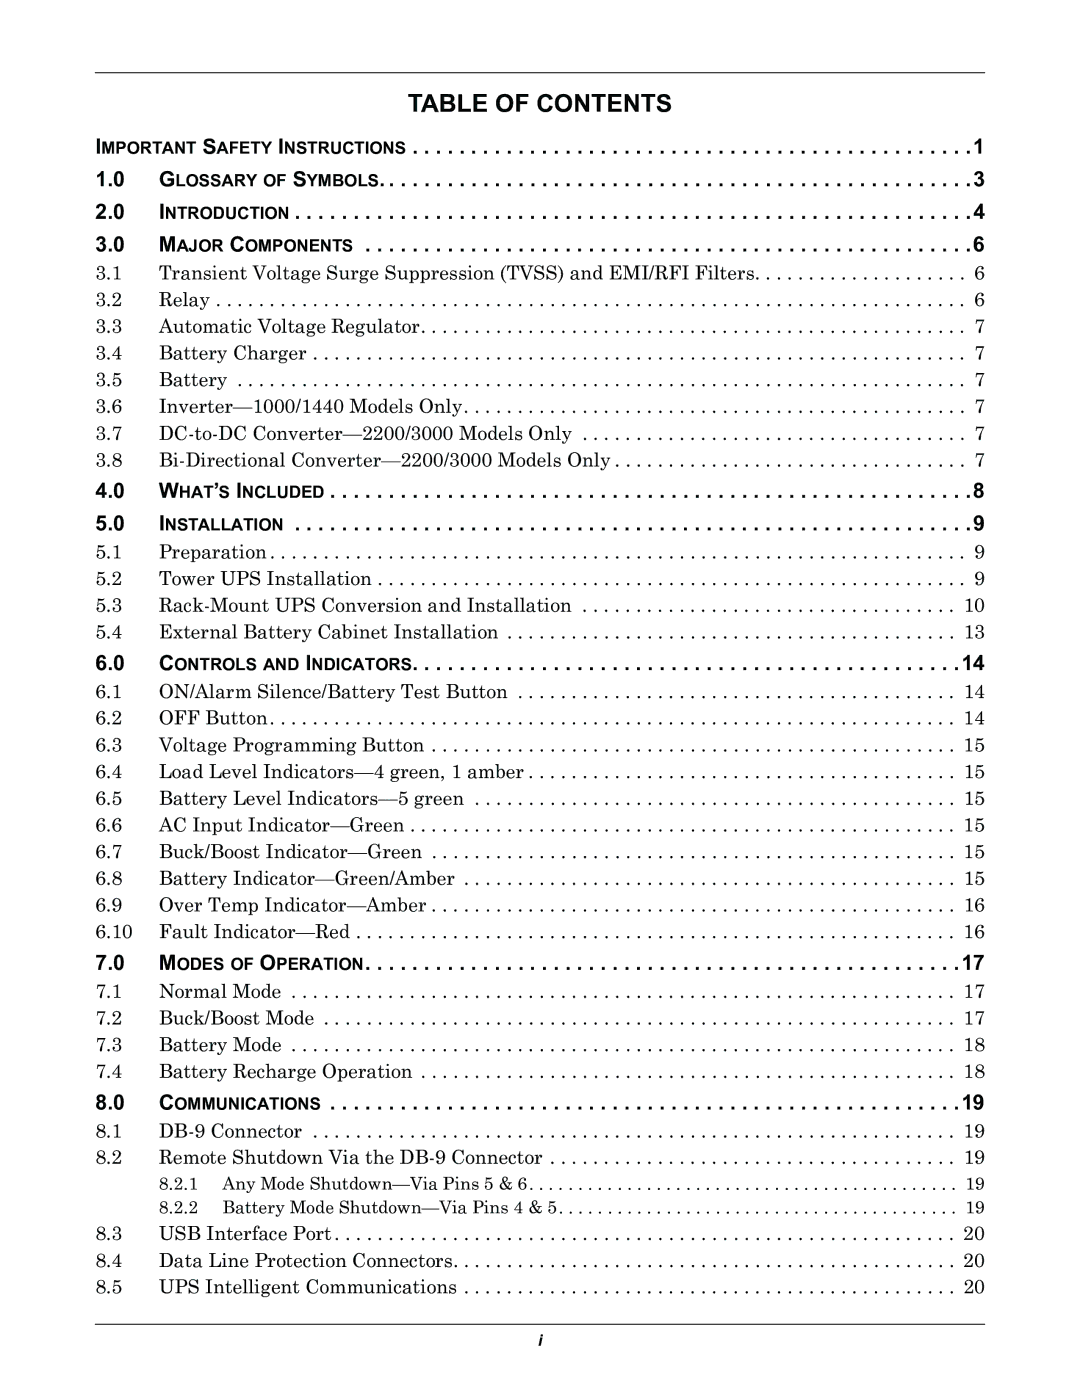 Liebert PSITM user manual Table of Contents 